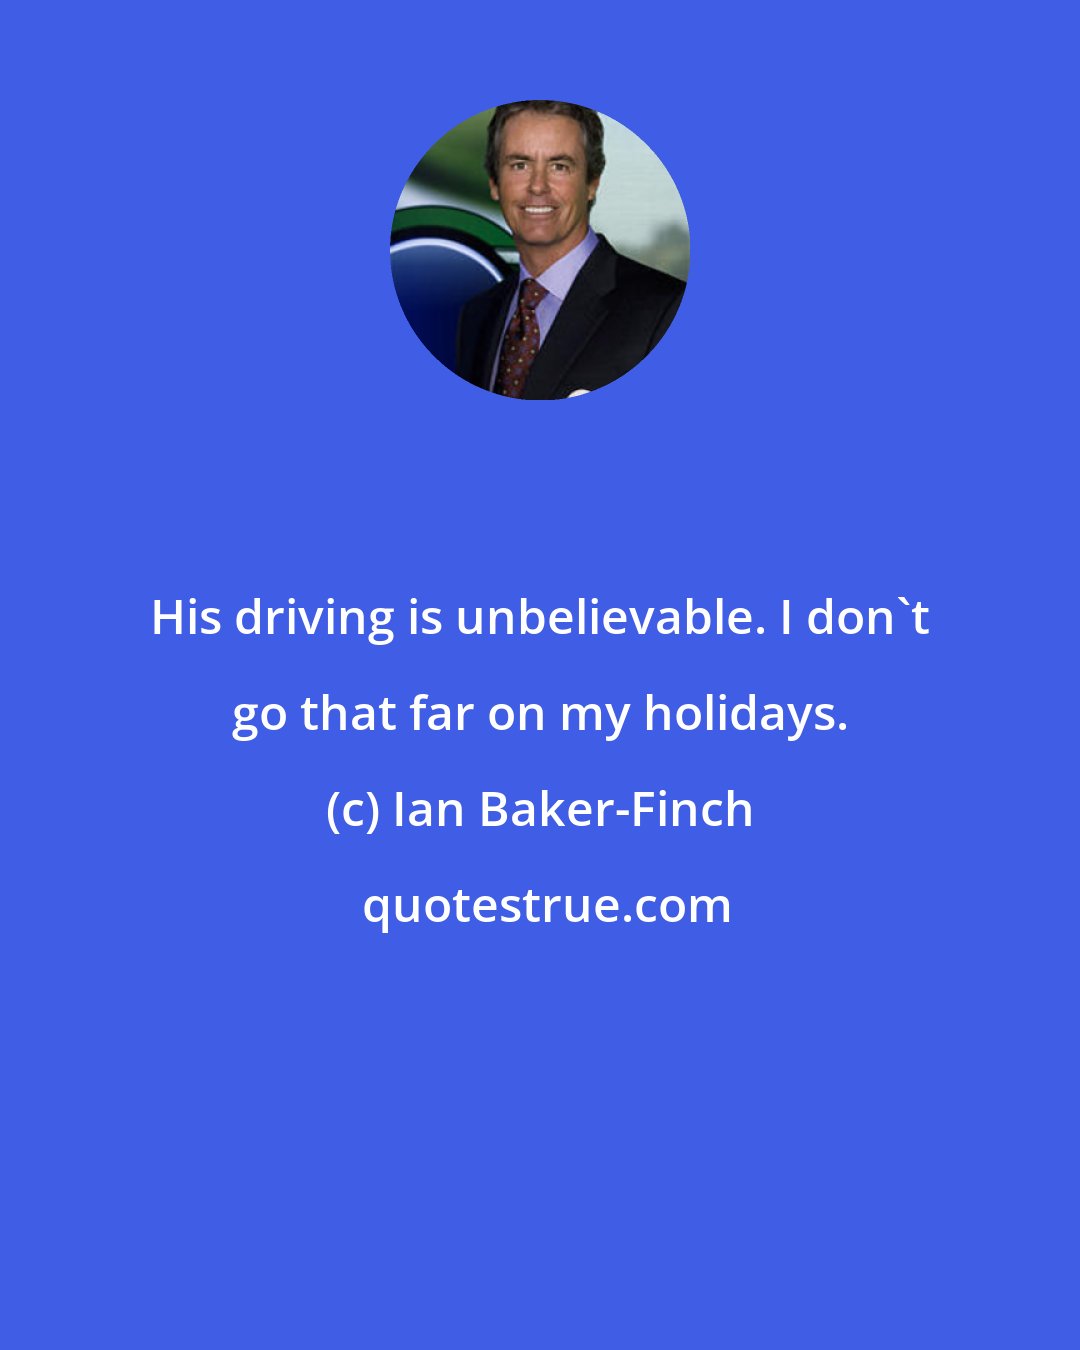 Ian Baker-Finch: His driving is unbelievable. I don't go that far on my holidays.